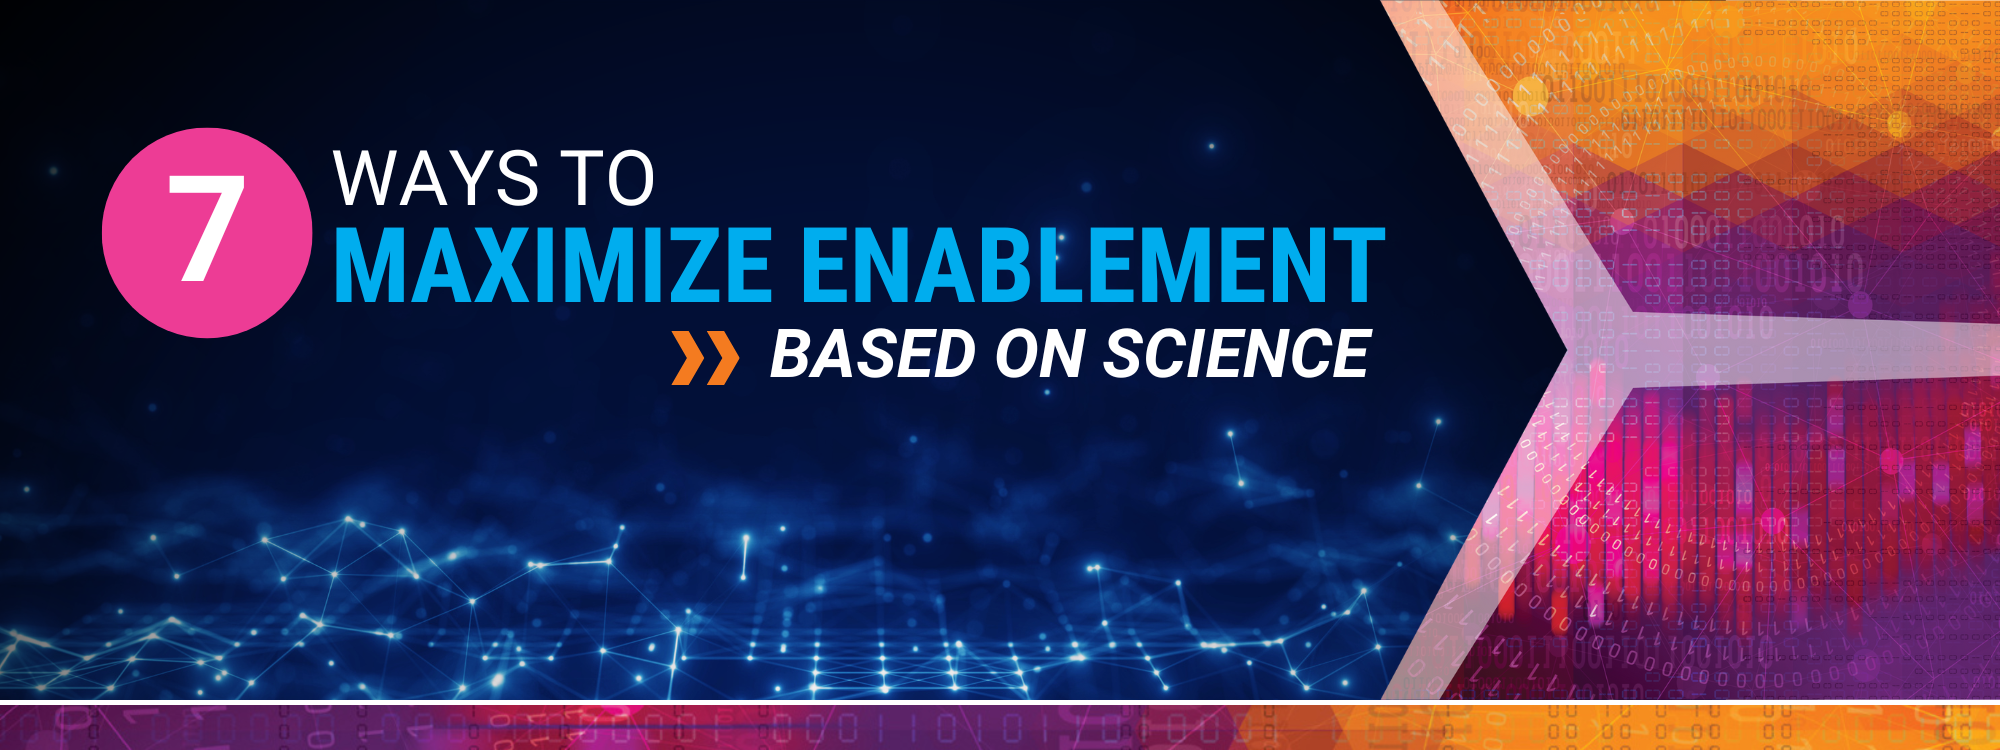 7 Ways to Maximize Enablement - Based on Science!